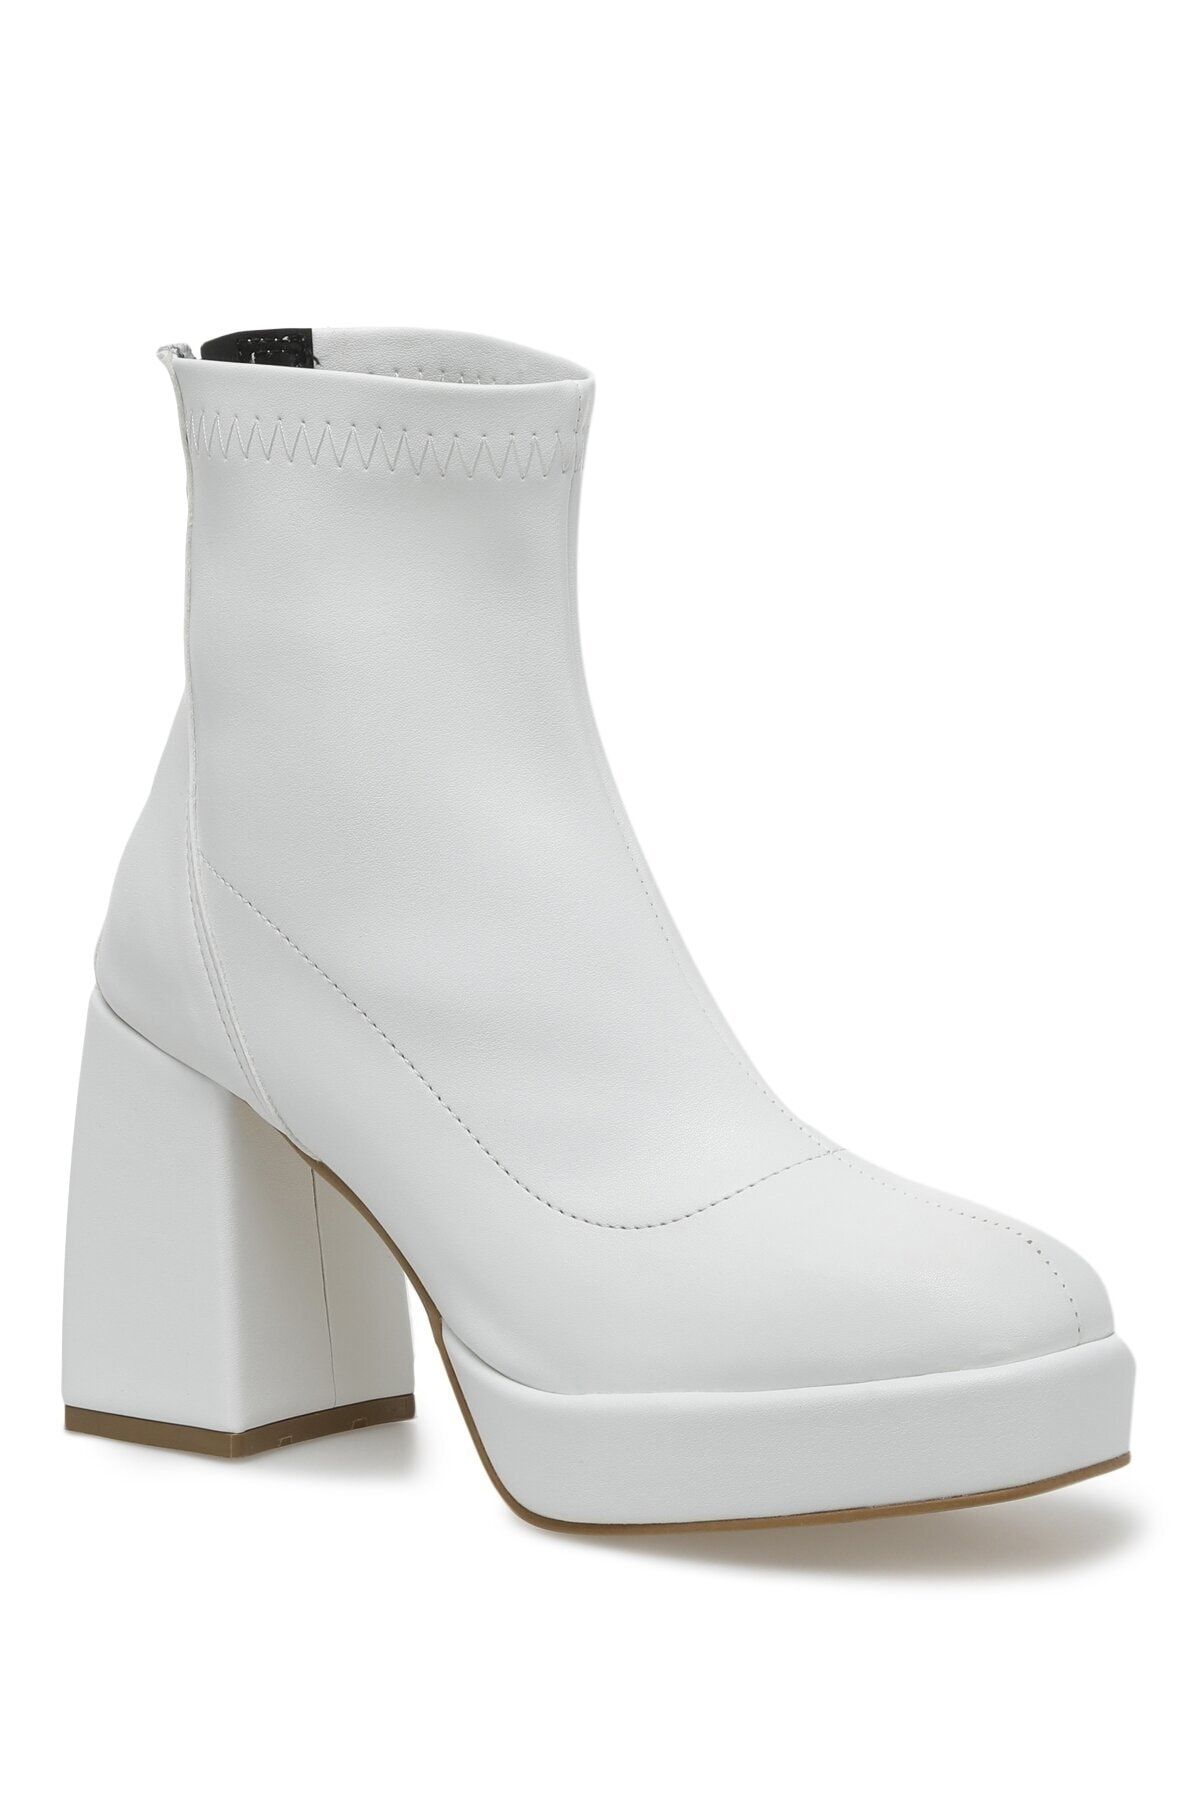 What If I Don't White Chunky Heeled Bootie – Afton Avenue Apparel